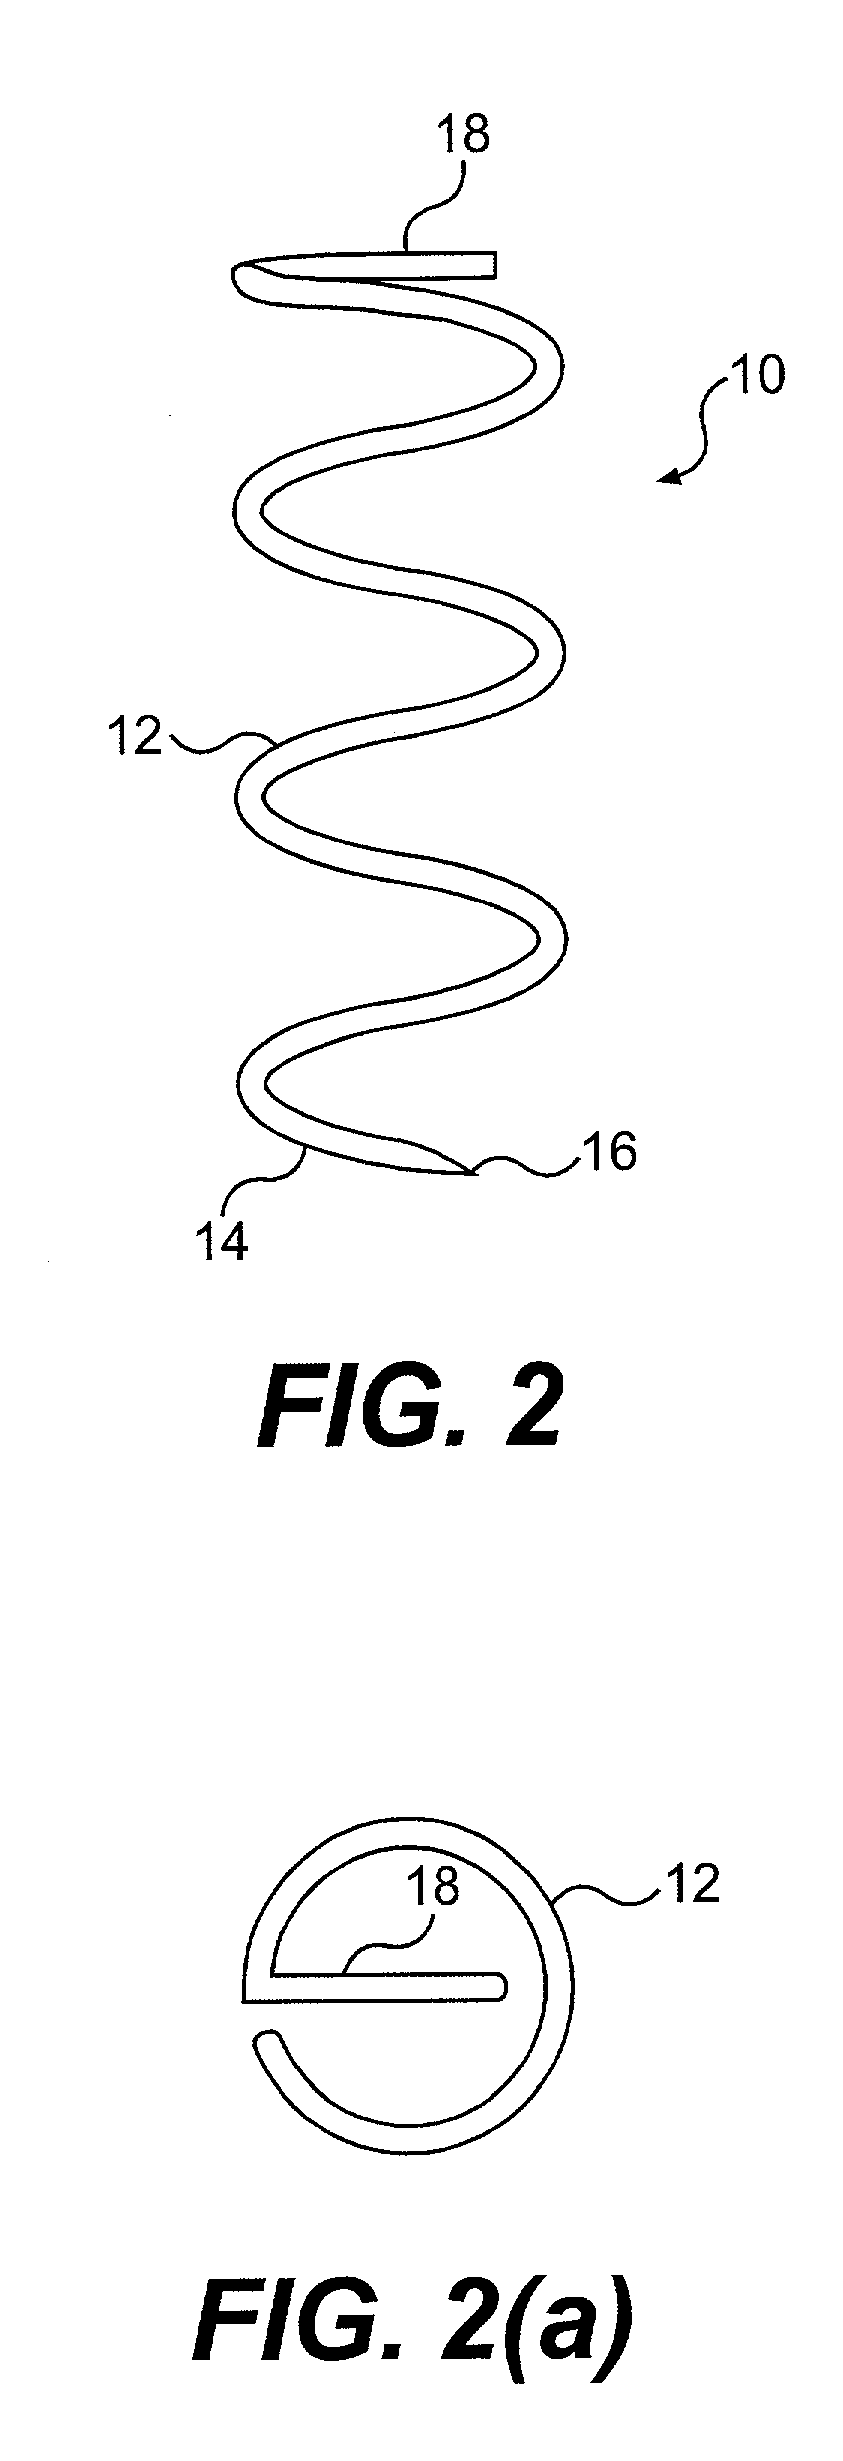 Tissue fastening devices and related insertion tools and methods